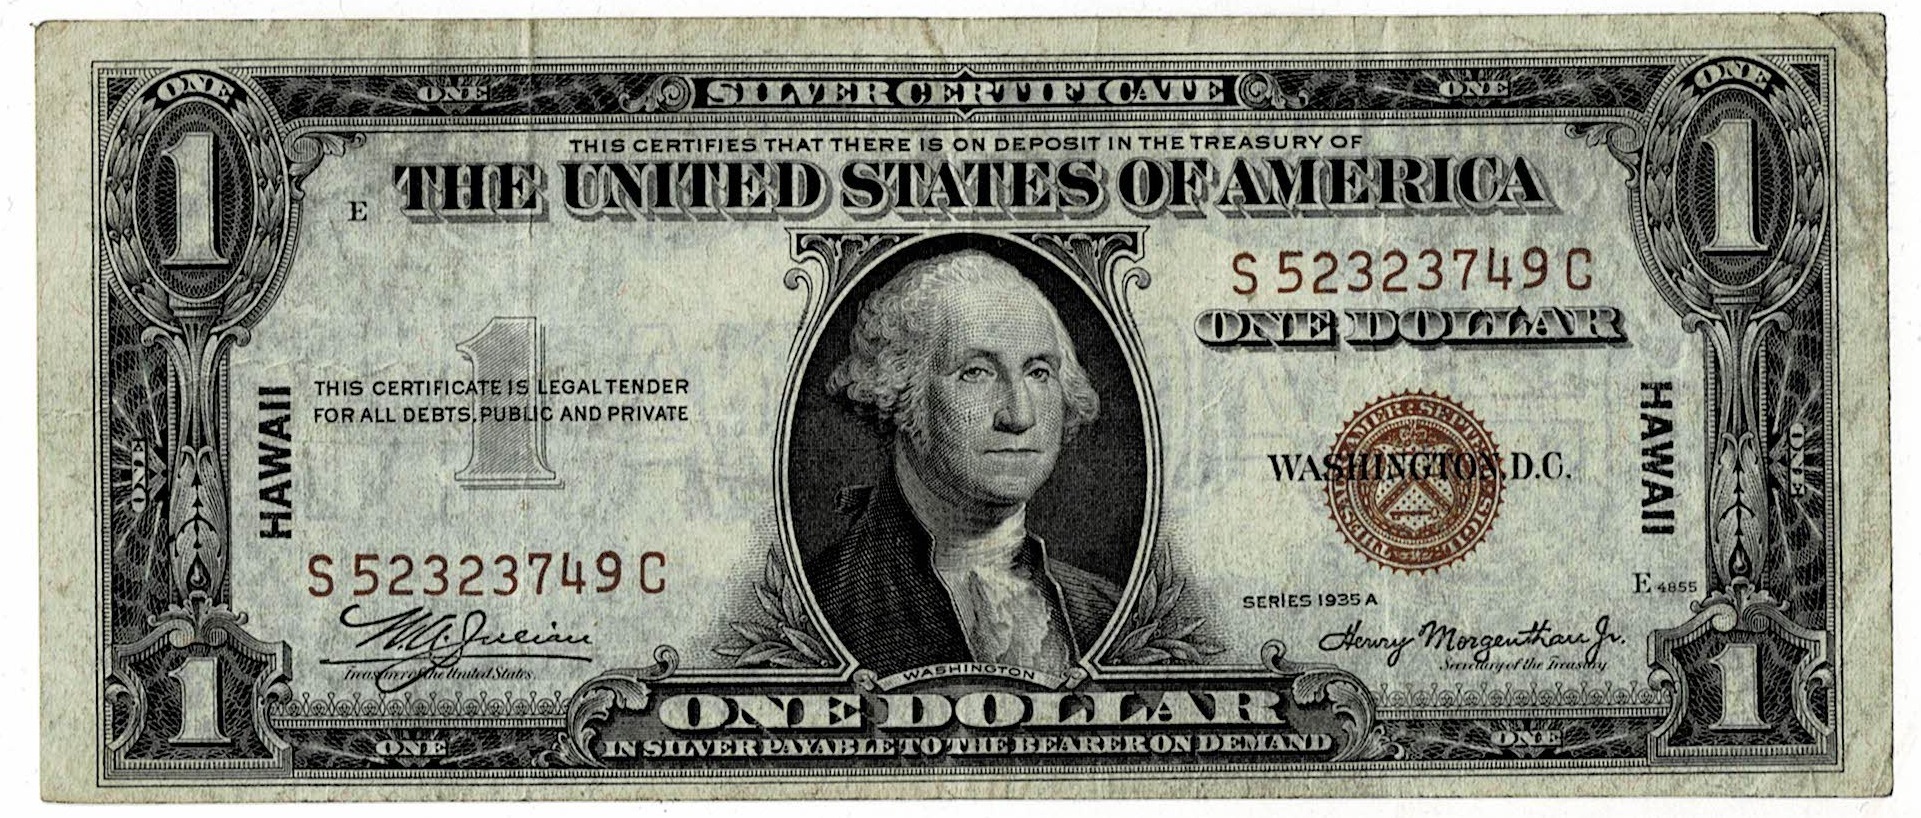 1935 A one dollar silver certificate